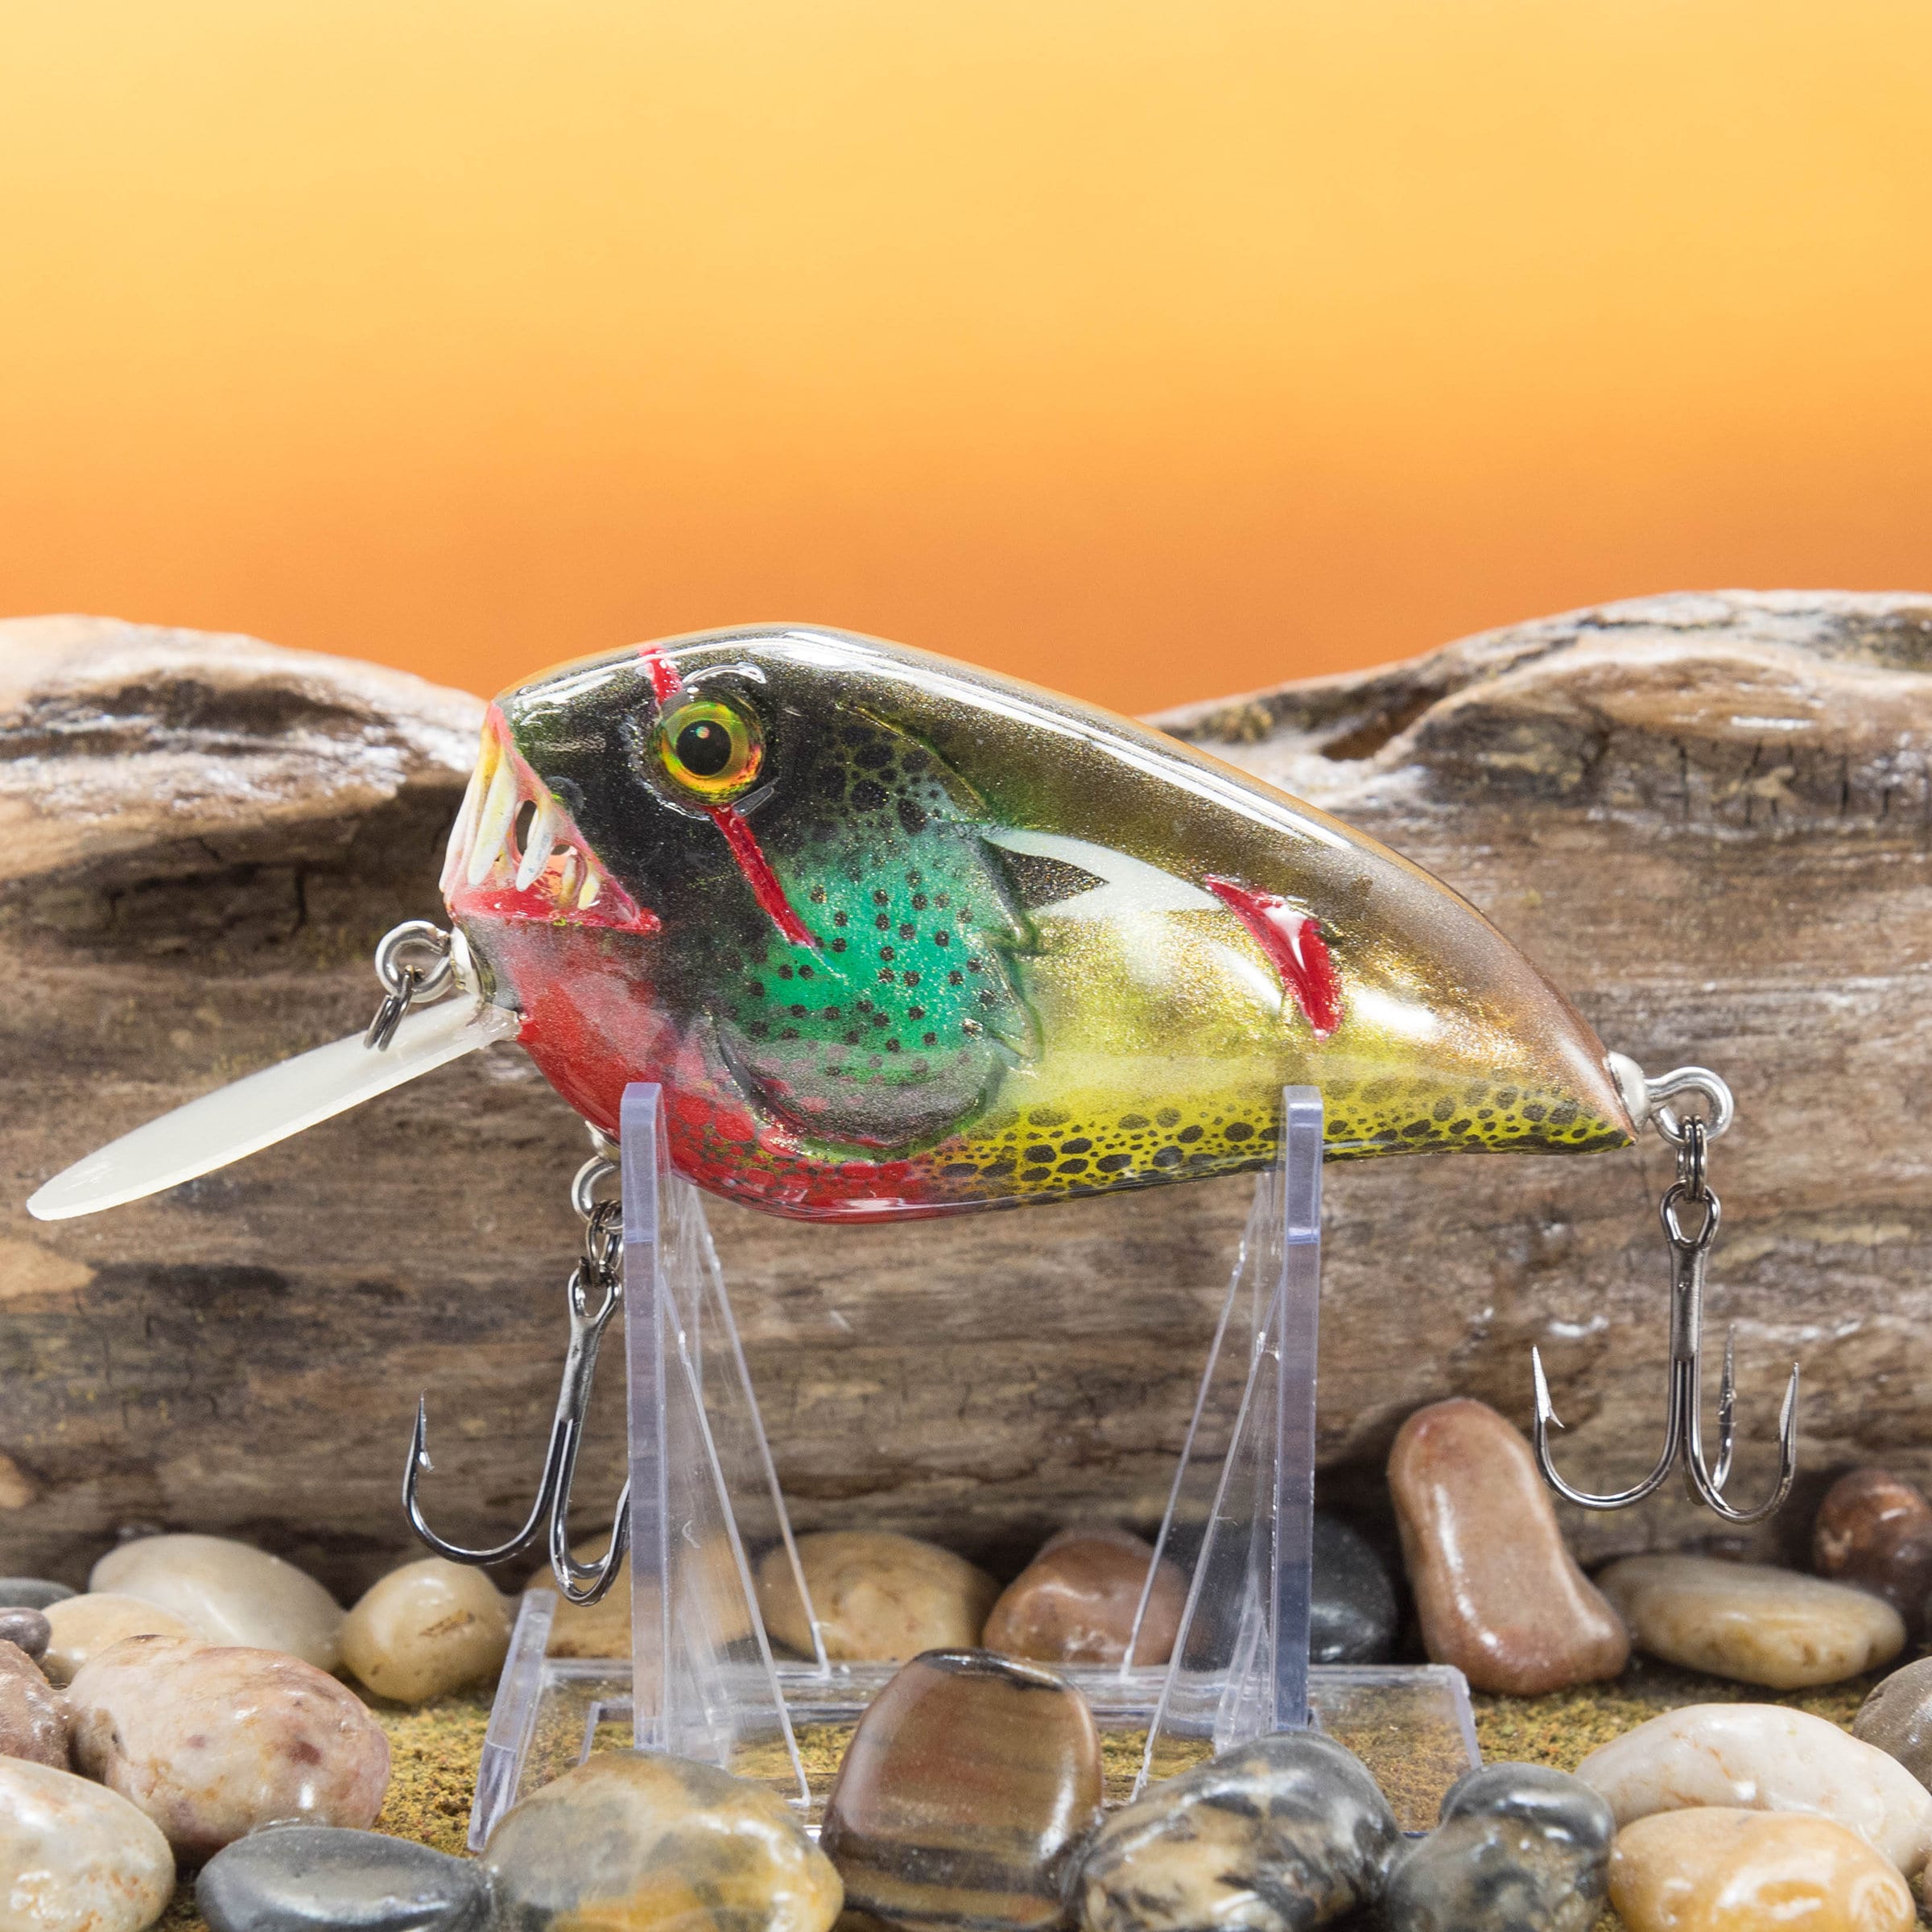 2.5 squarebill shallow diving crankbait with custom painted body